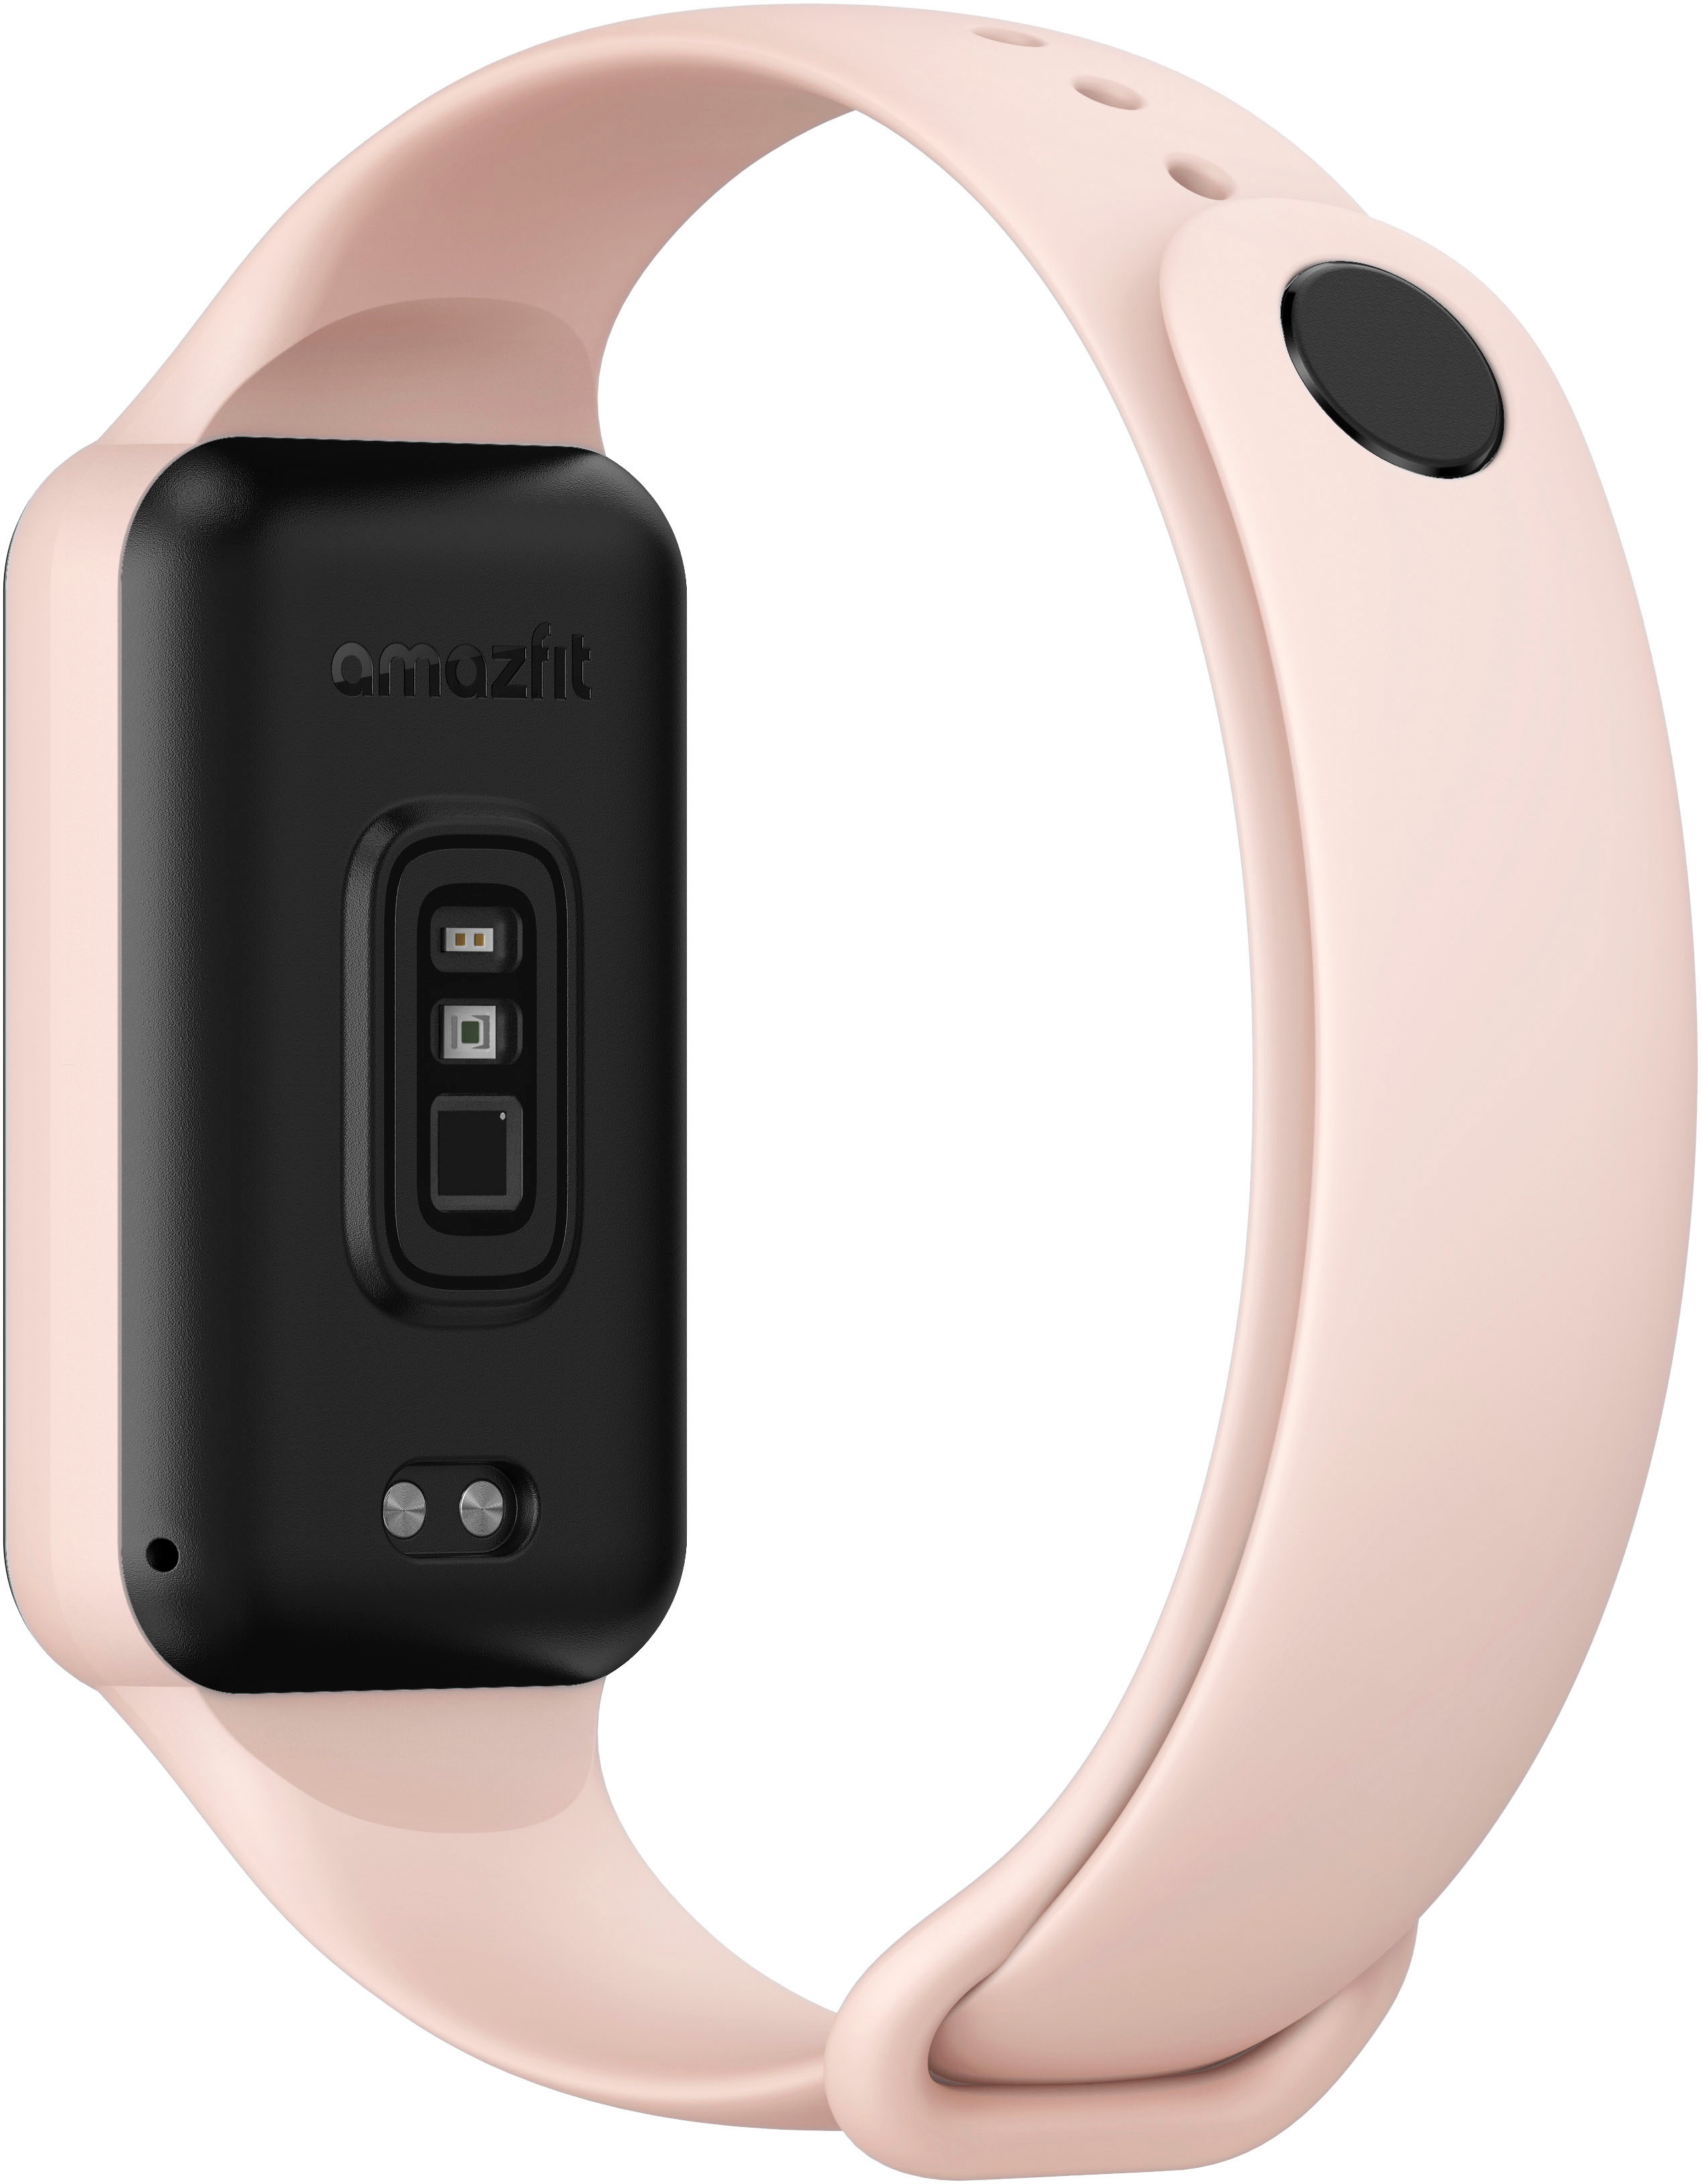 Amazfit Band 7 Activity and Fitness Tracker 37.3mm Polycarbonate Black  B2177OV1N - Best Buy